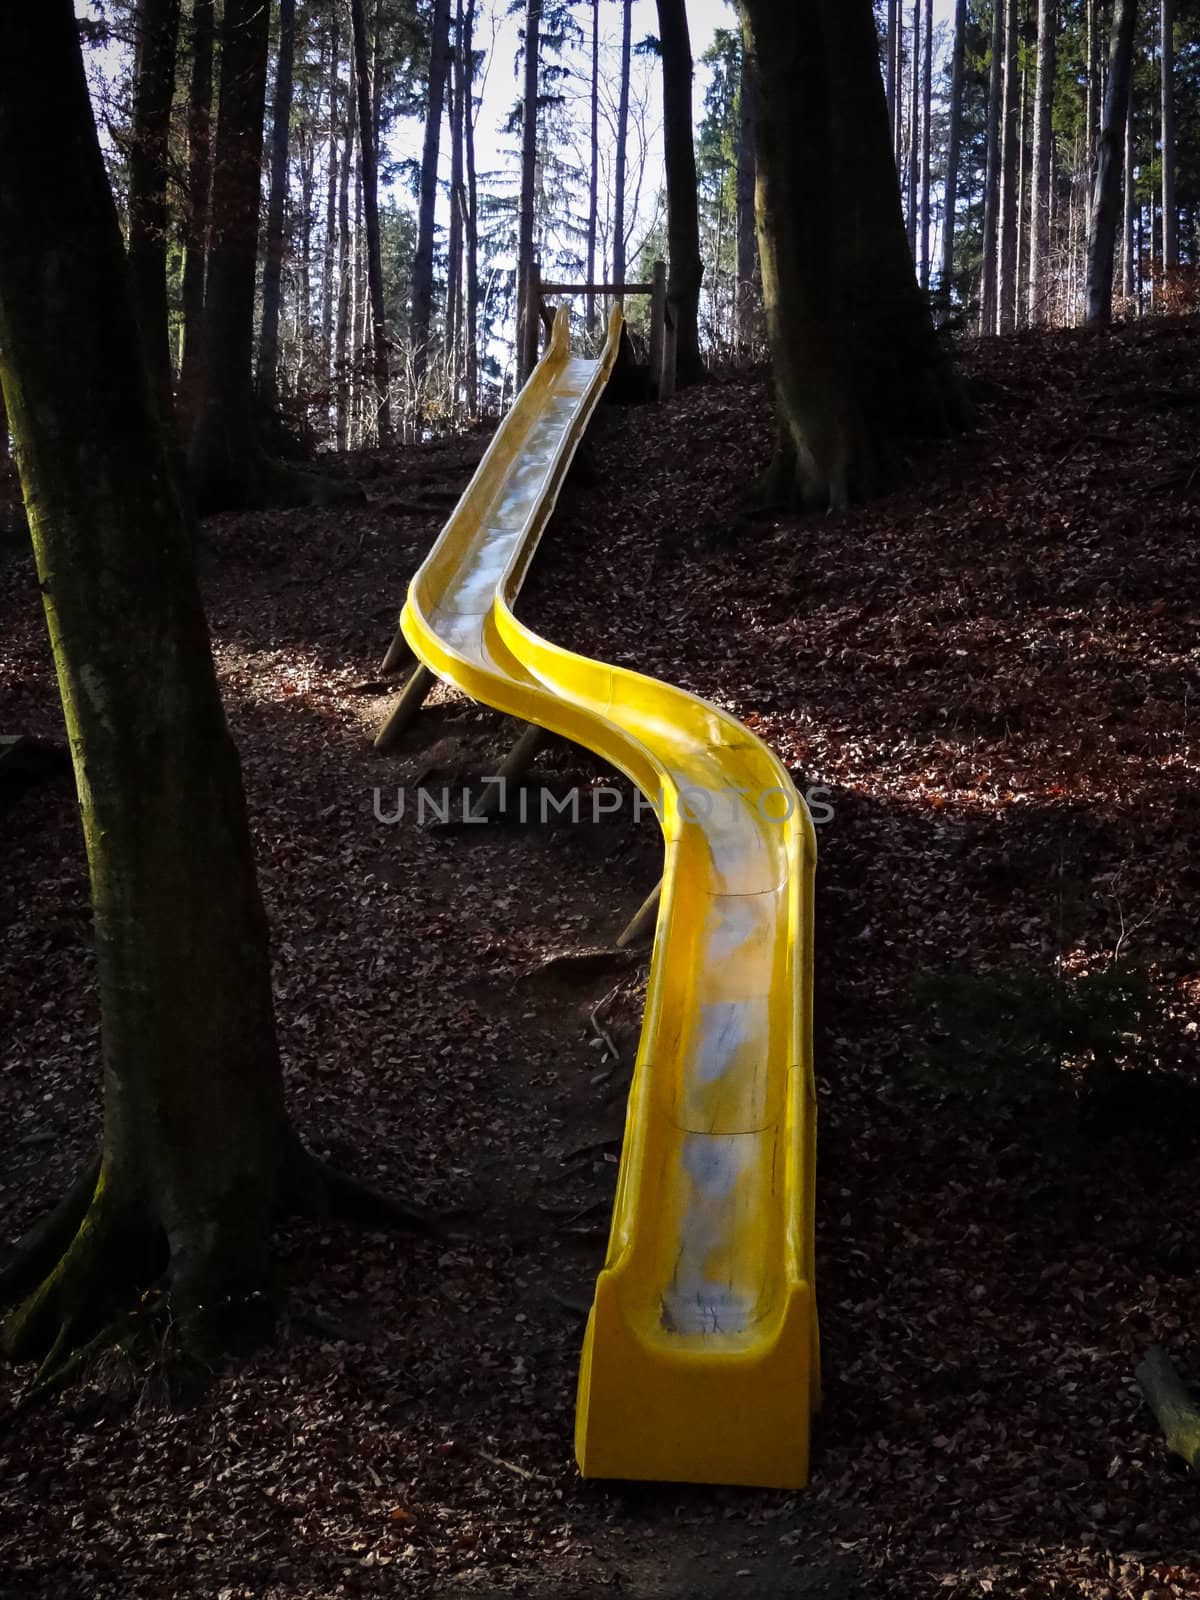 A yellow sliding board in the woods